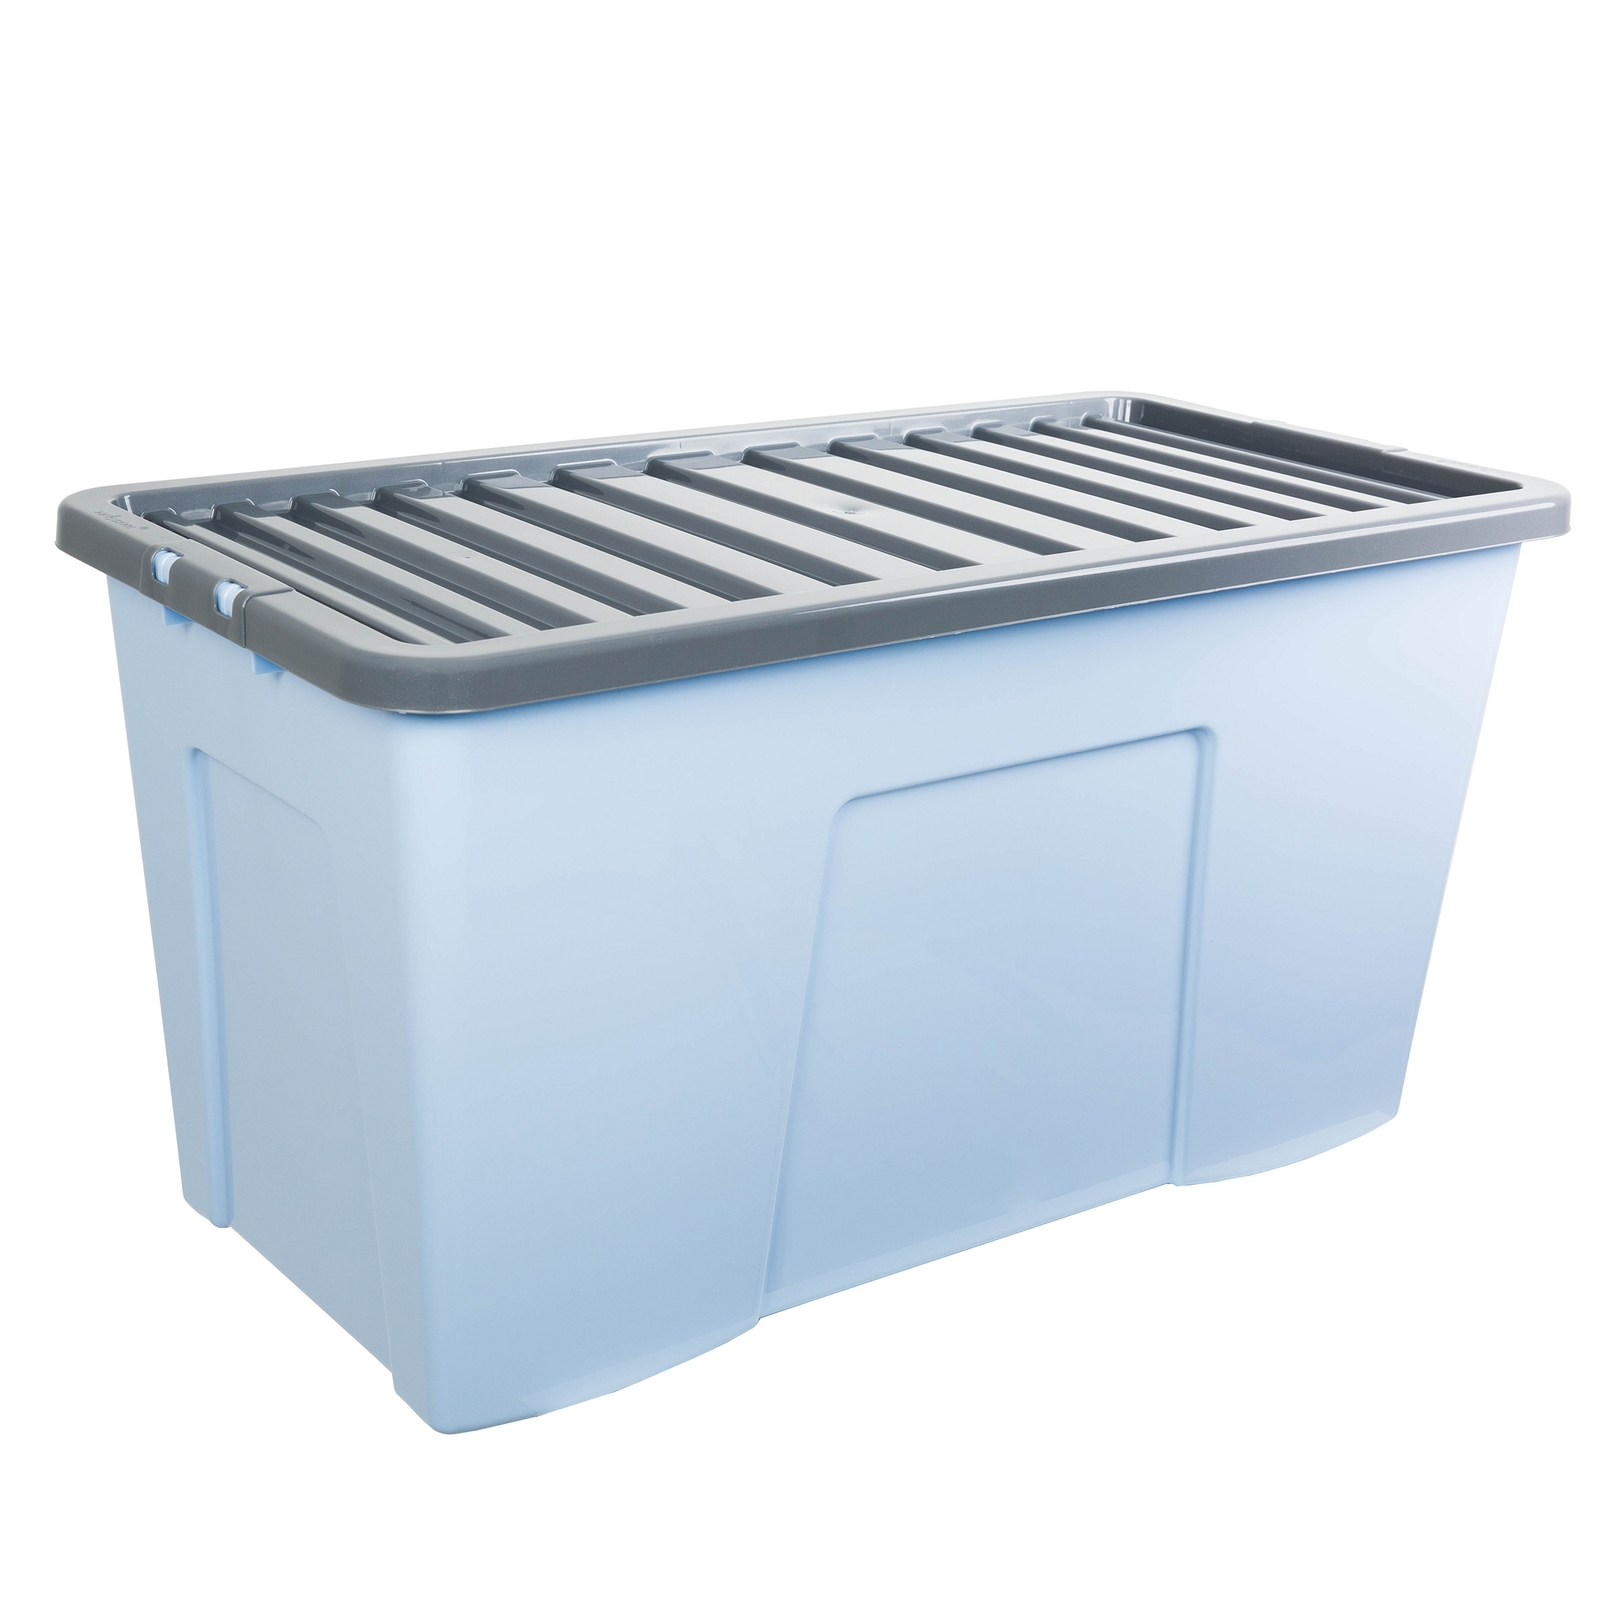 110 Litre Box and Lid - Blue/Steel